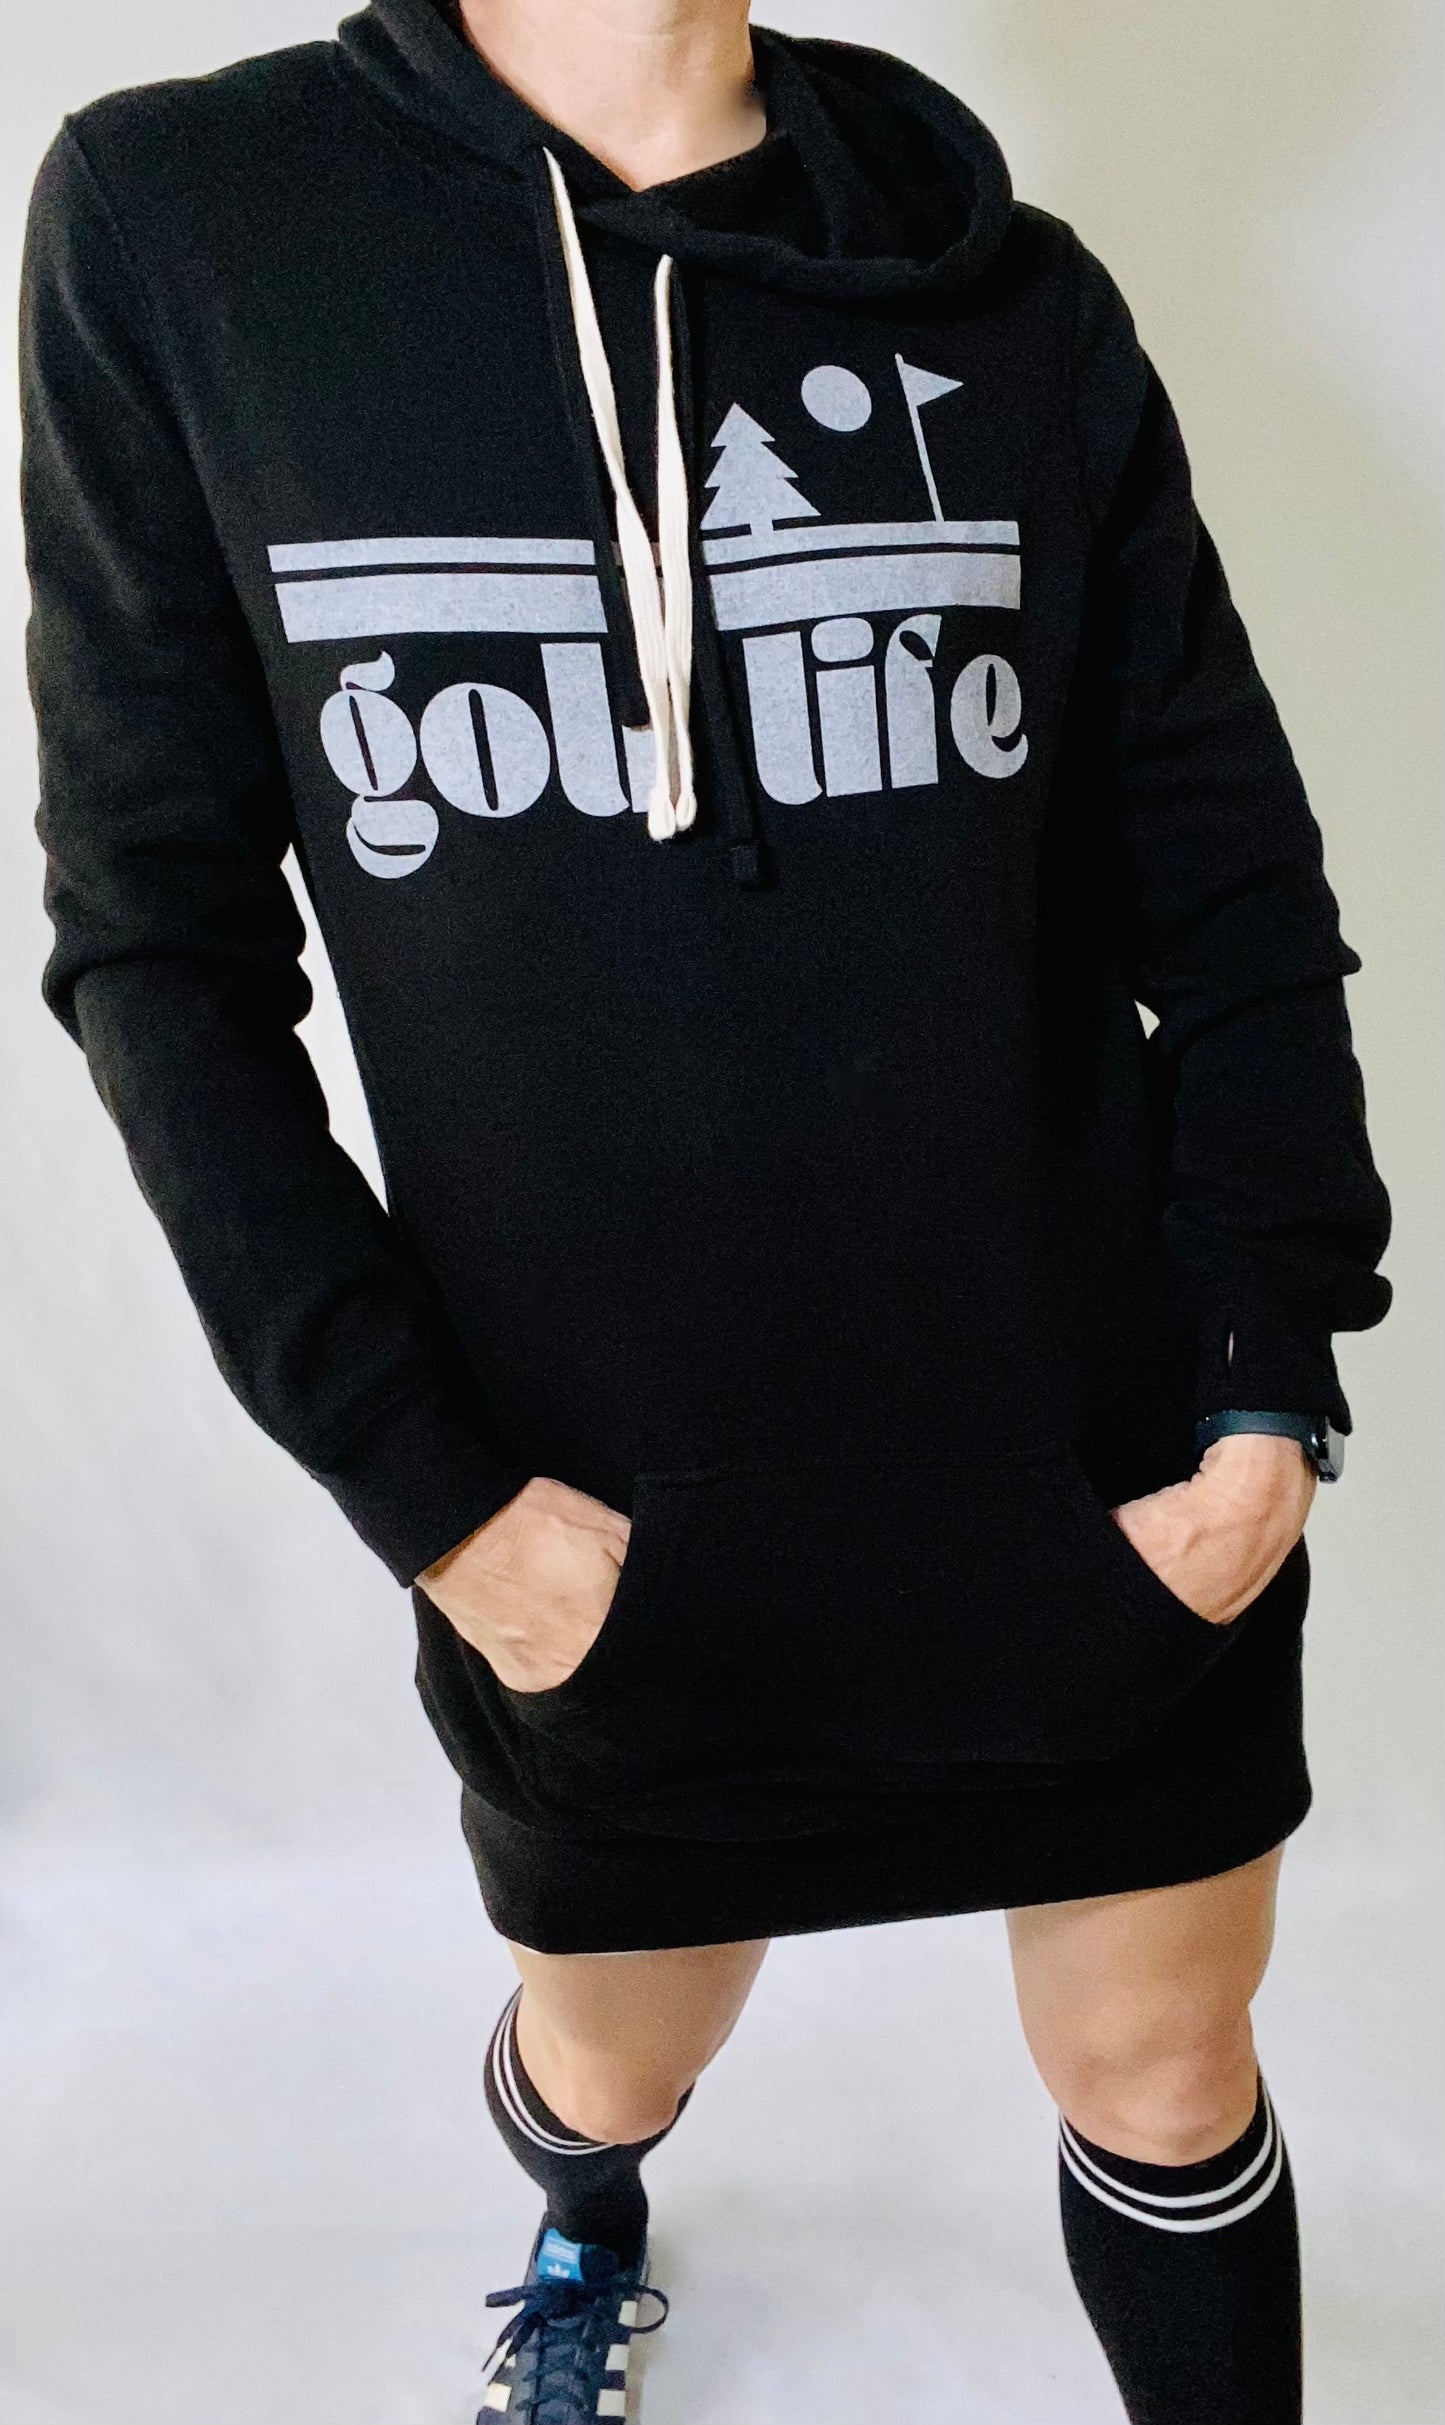 This is a photograph of a woman wearing a black, hooded sweatshirt dress. She's wearing black knee high socks. The sweatshirt features a bold design that says "Golf Life"